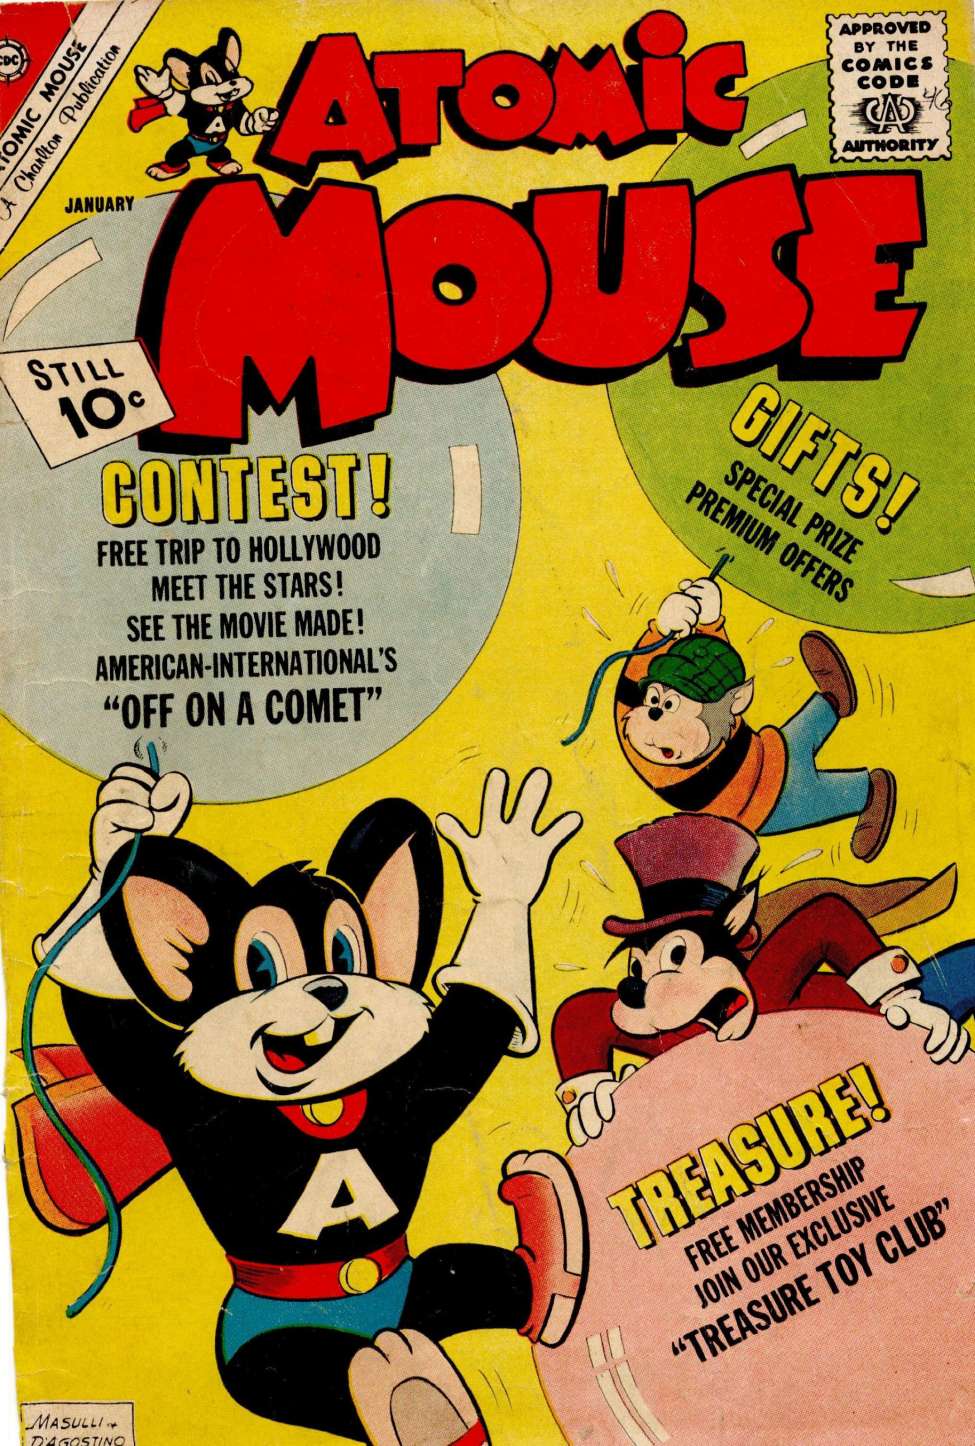 Book Cover For Atomic Mouse 46